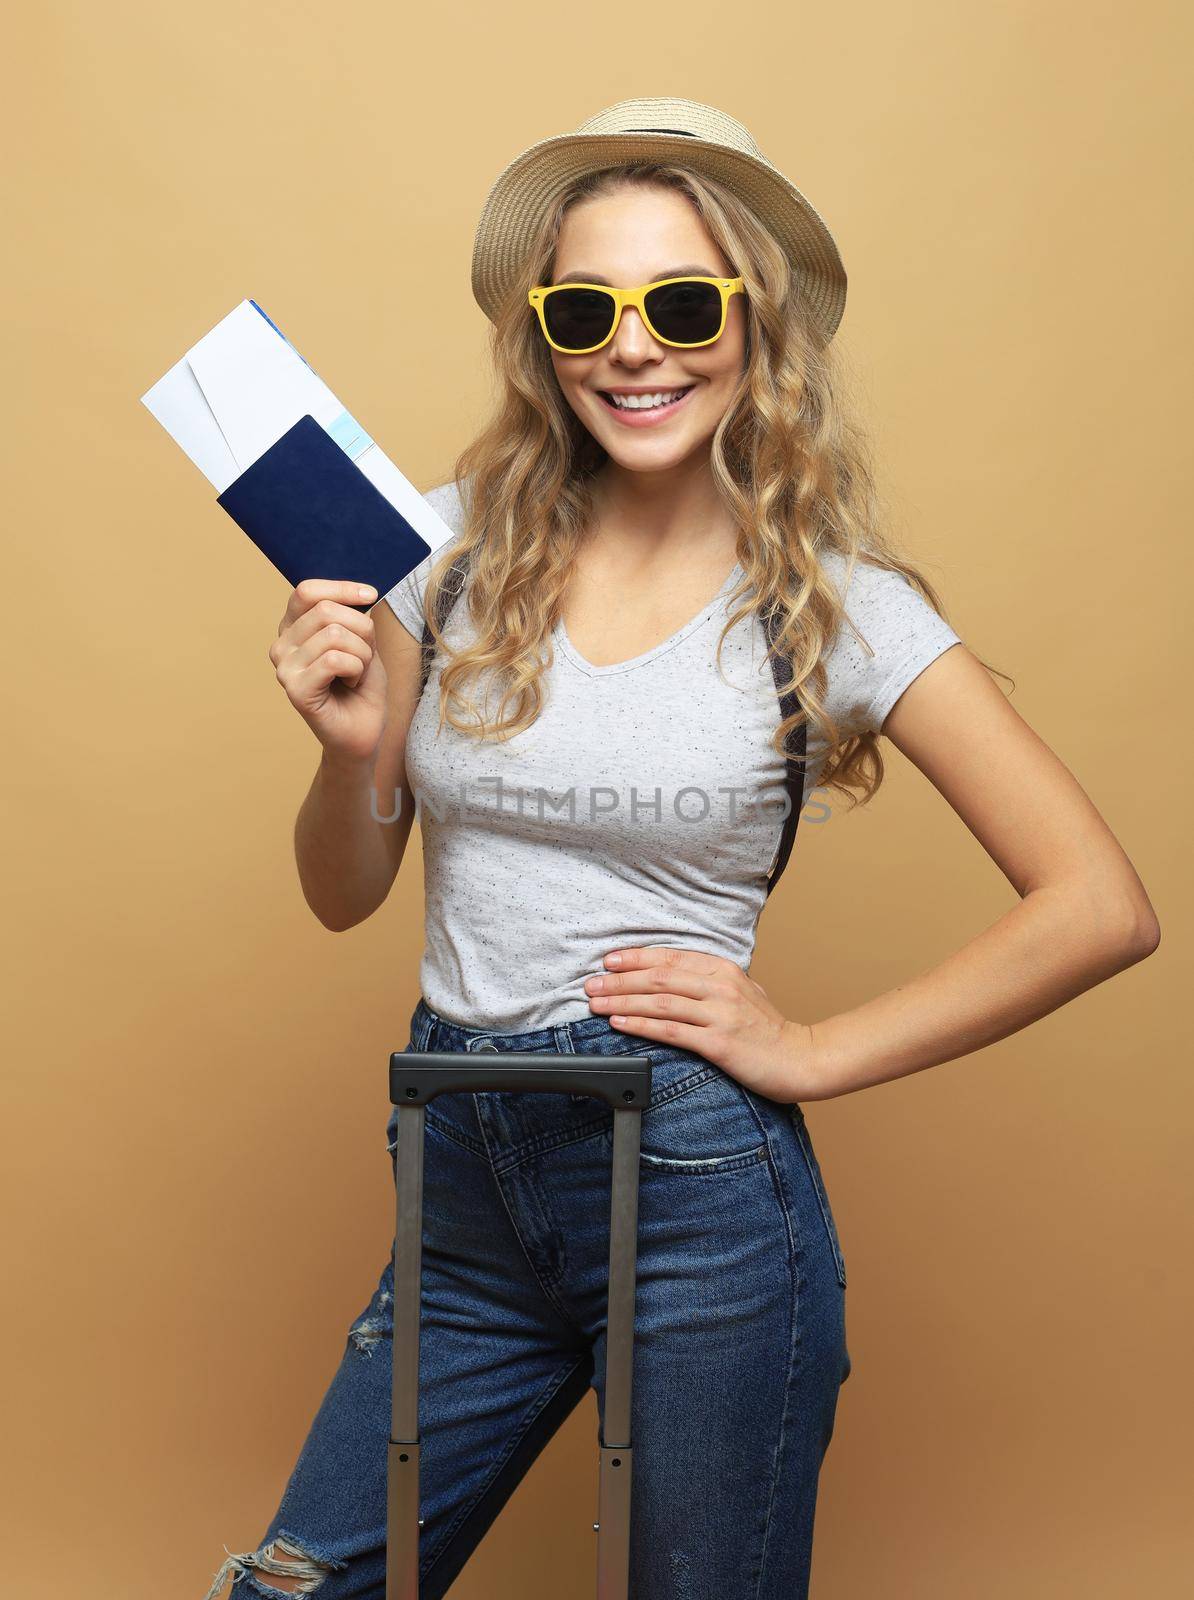 Cheerful blonde woman in sunglasses posing with baggage and holding passport with tickets over beige background